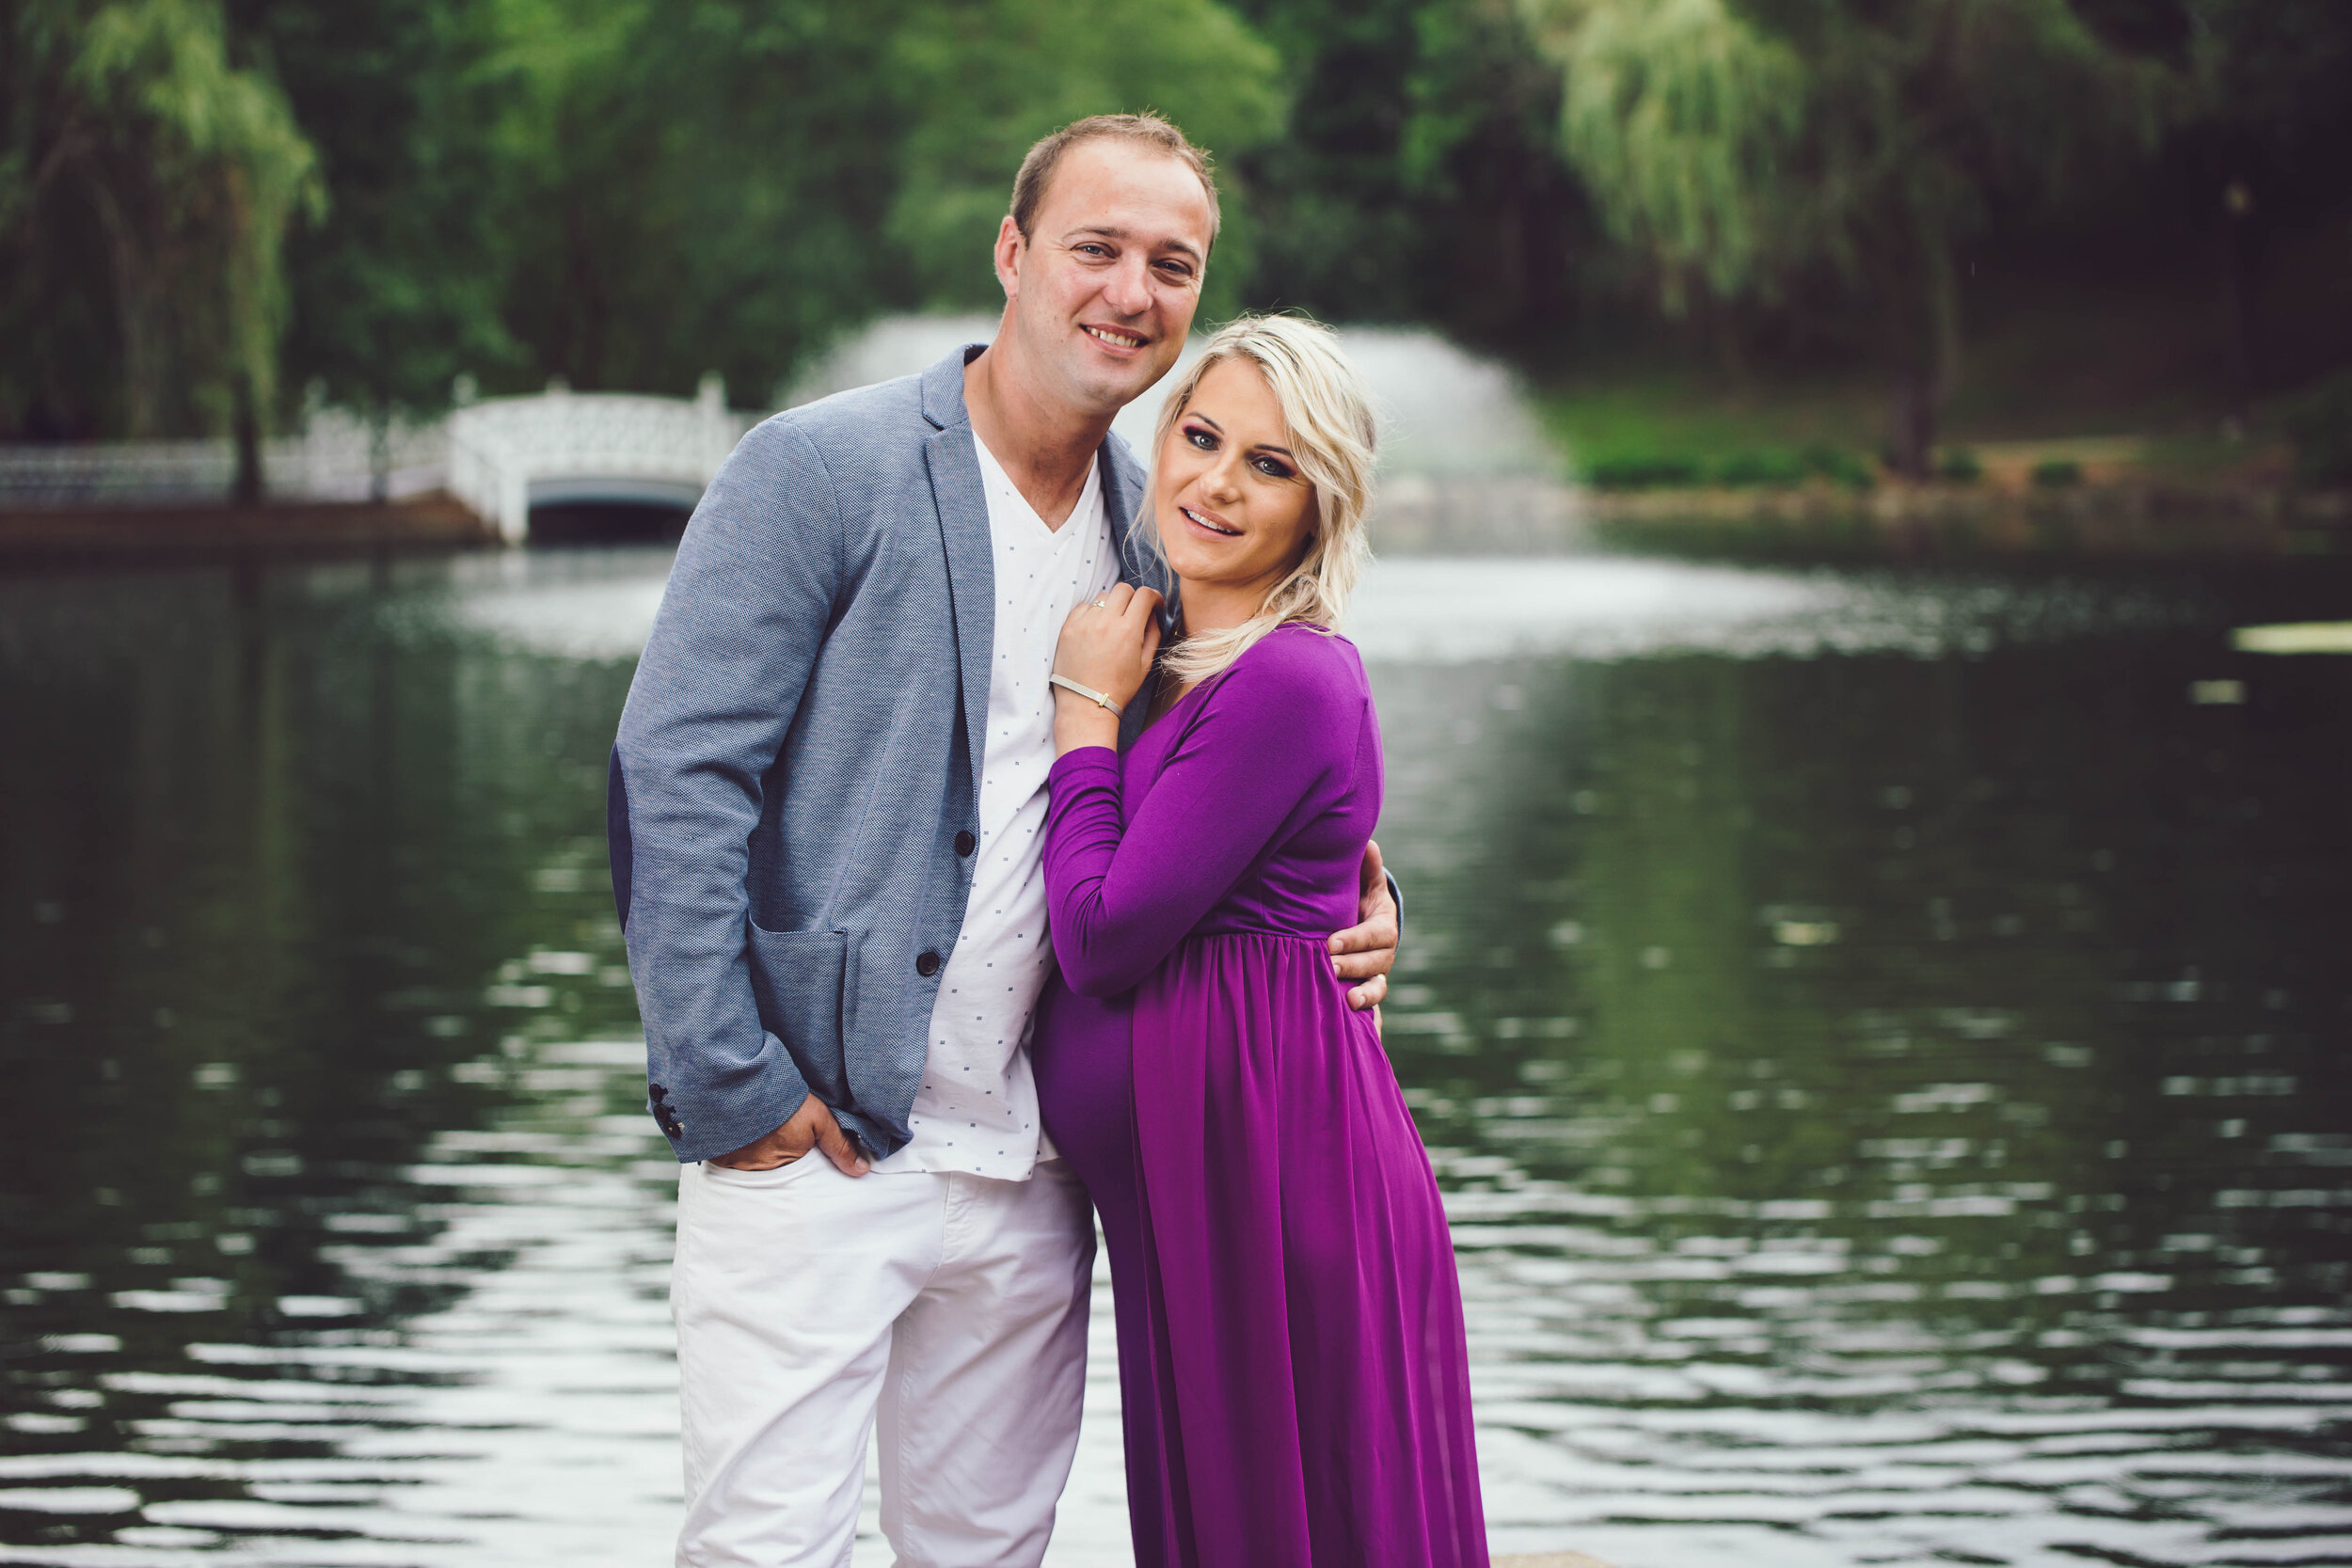 Family Photography, Maternity Photography - Schaumburg IL and surrounding areas